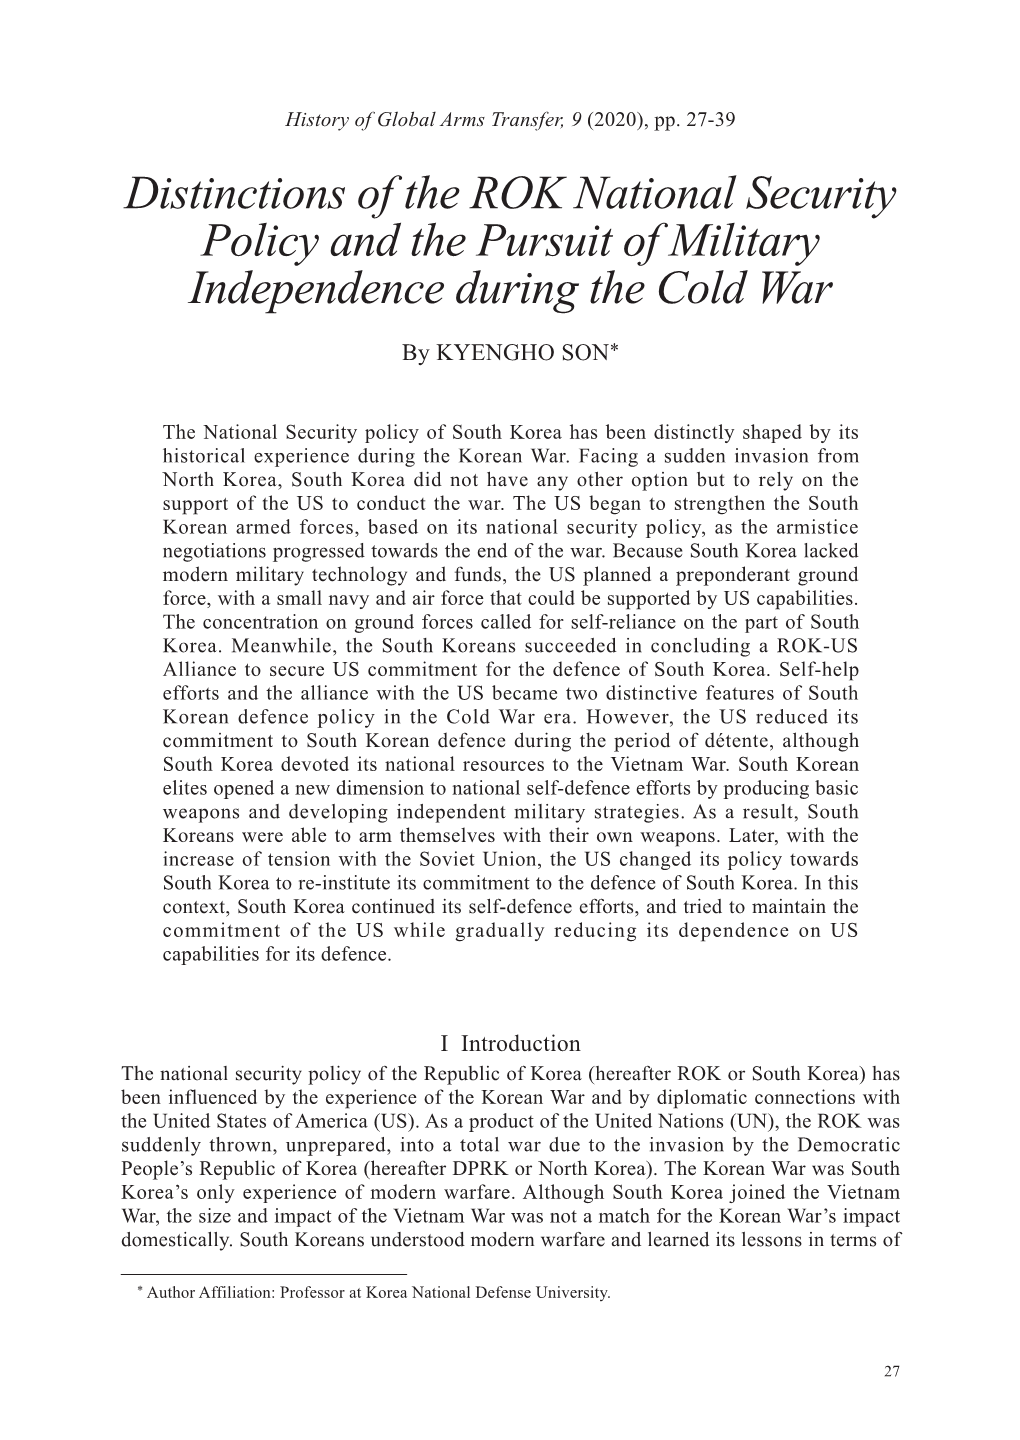 Distinctions of the ROK National Security Policy and the Pursuit of Military Independence During the Cold War